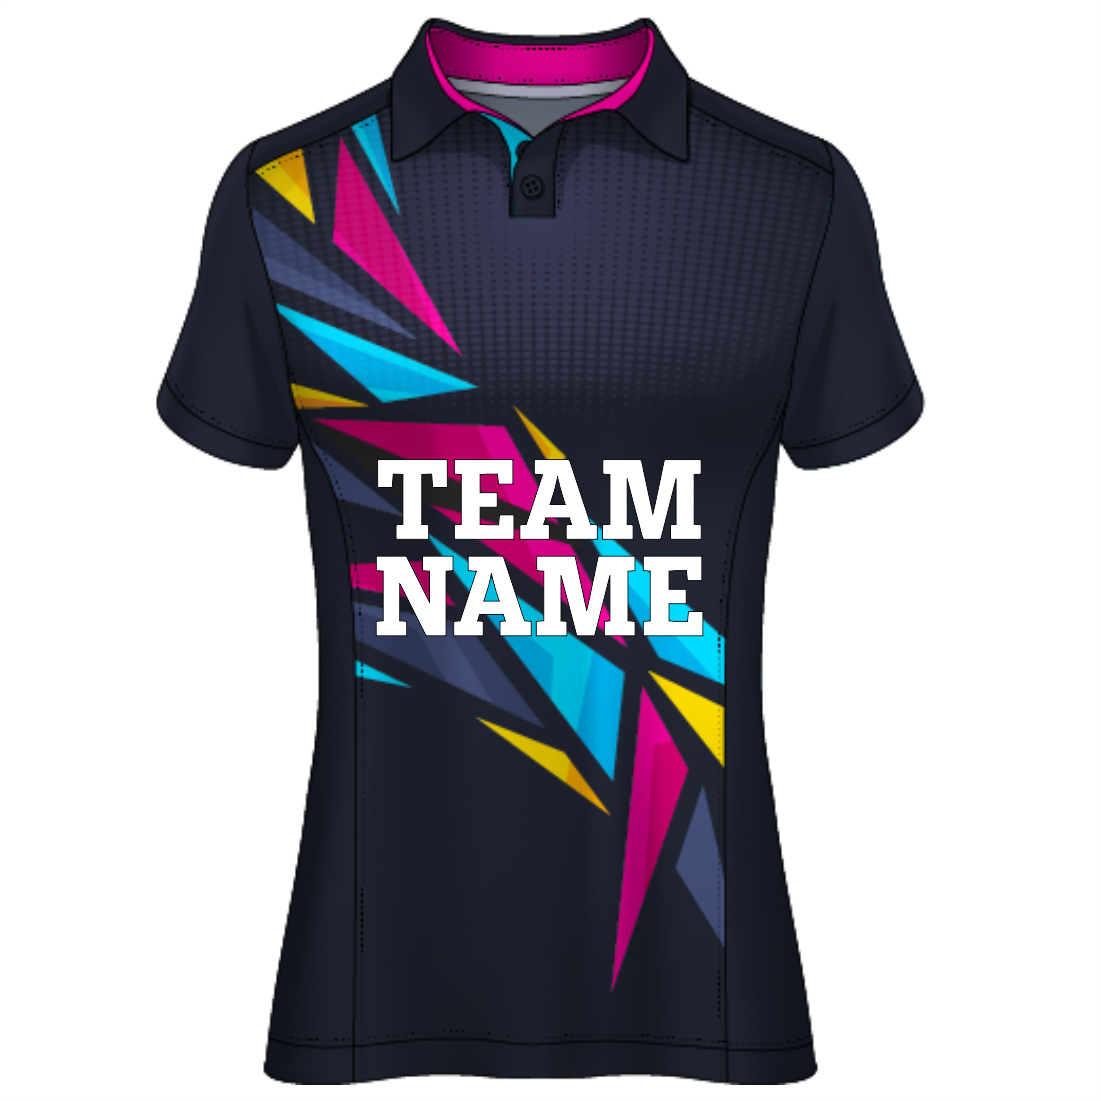 NEXT PRINT All Over Printed Customized Sublimation T-Shirt Unisex Spor –  Next Print